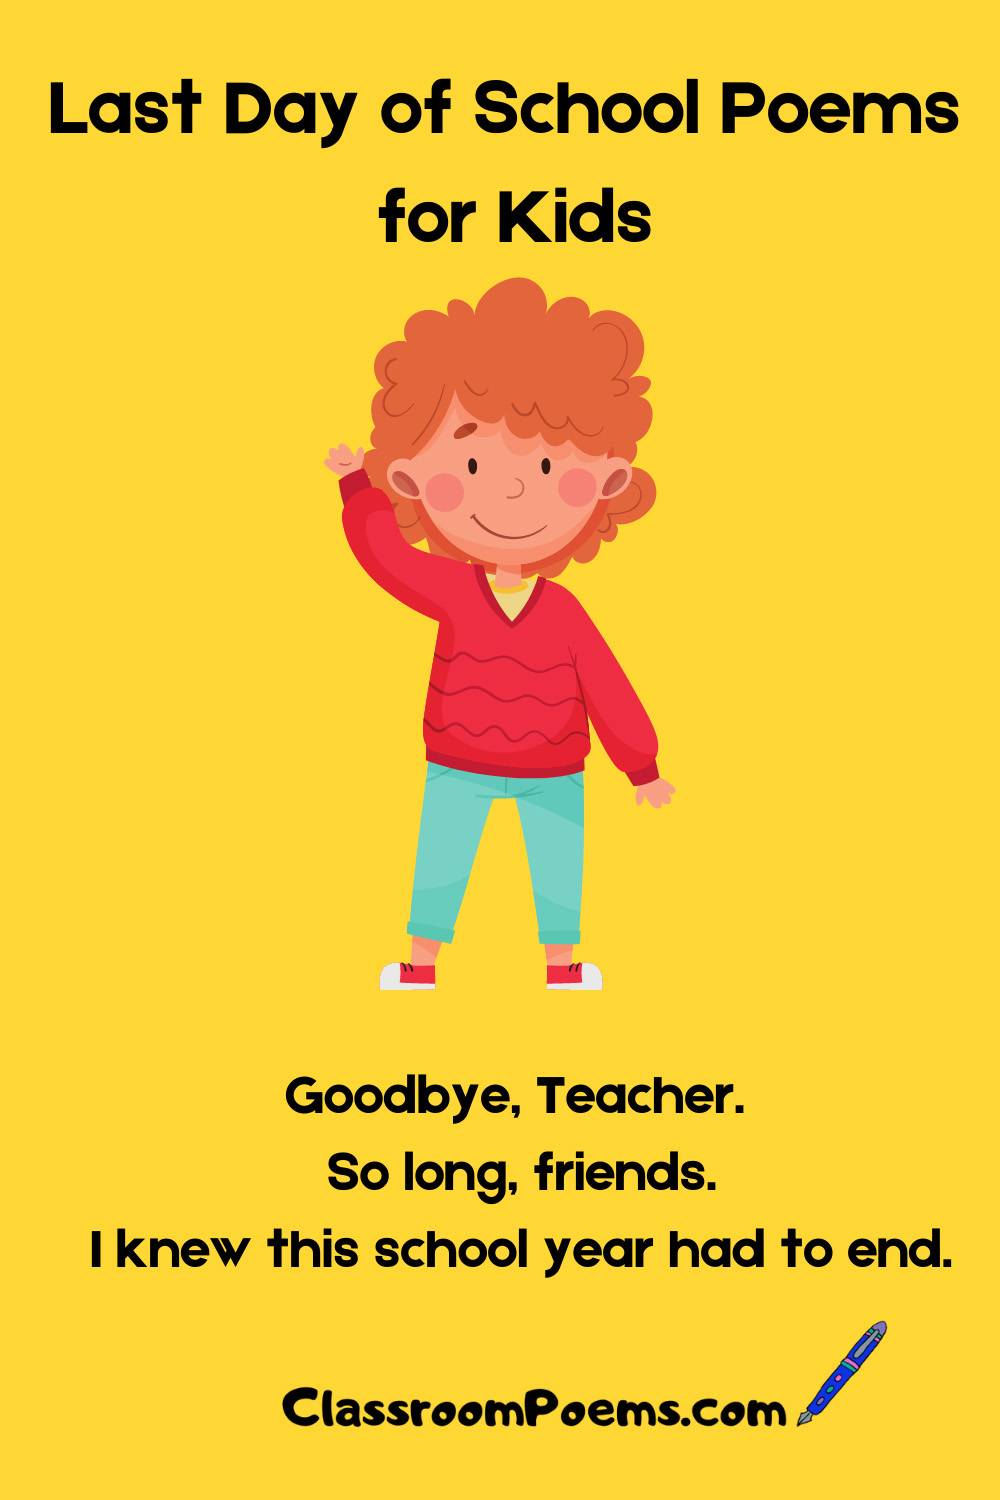 Hip, hip, hooray! Enjoy these last day of school poems for kids.